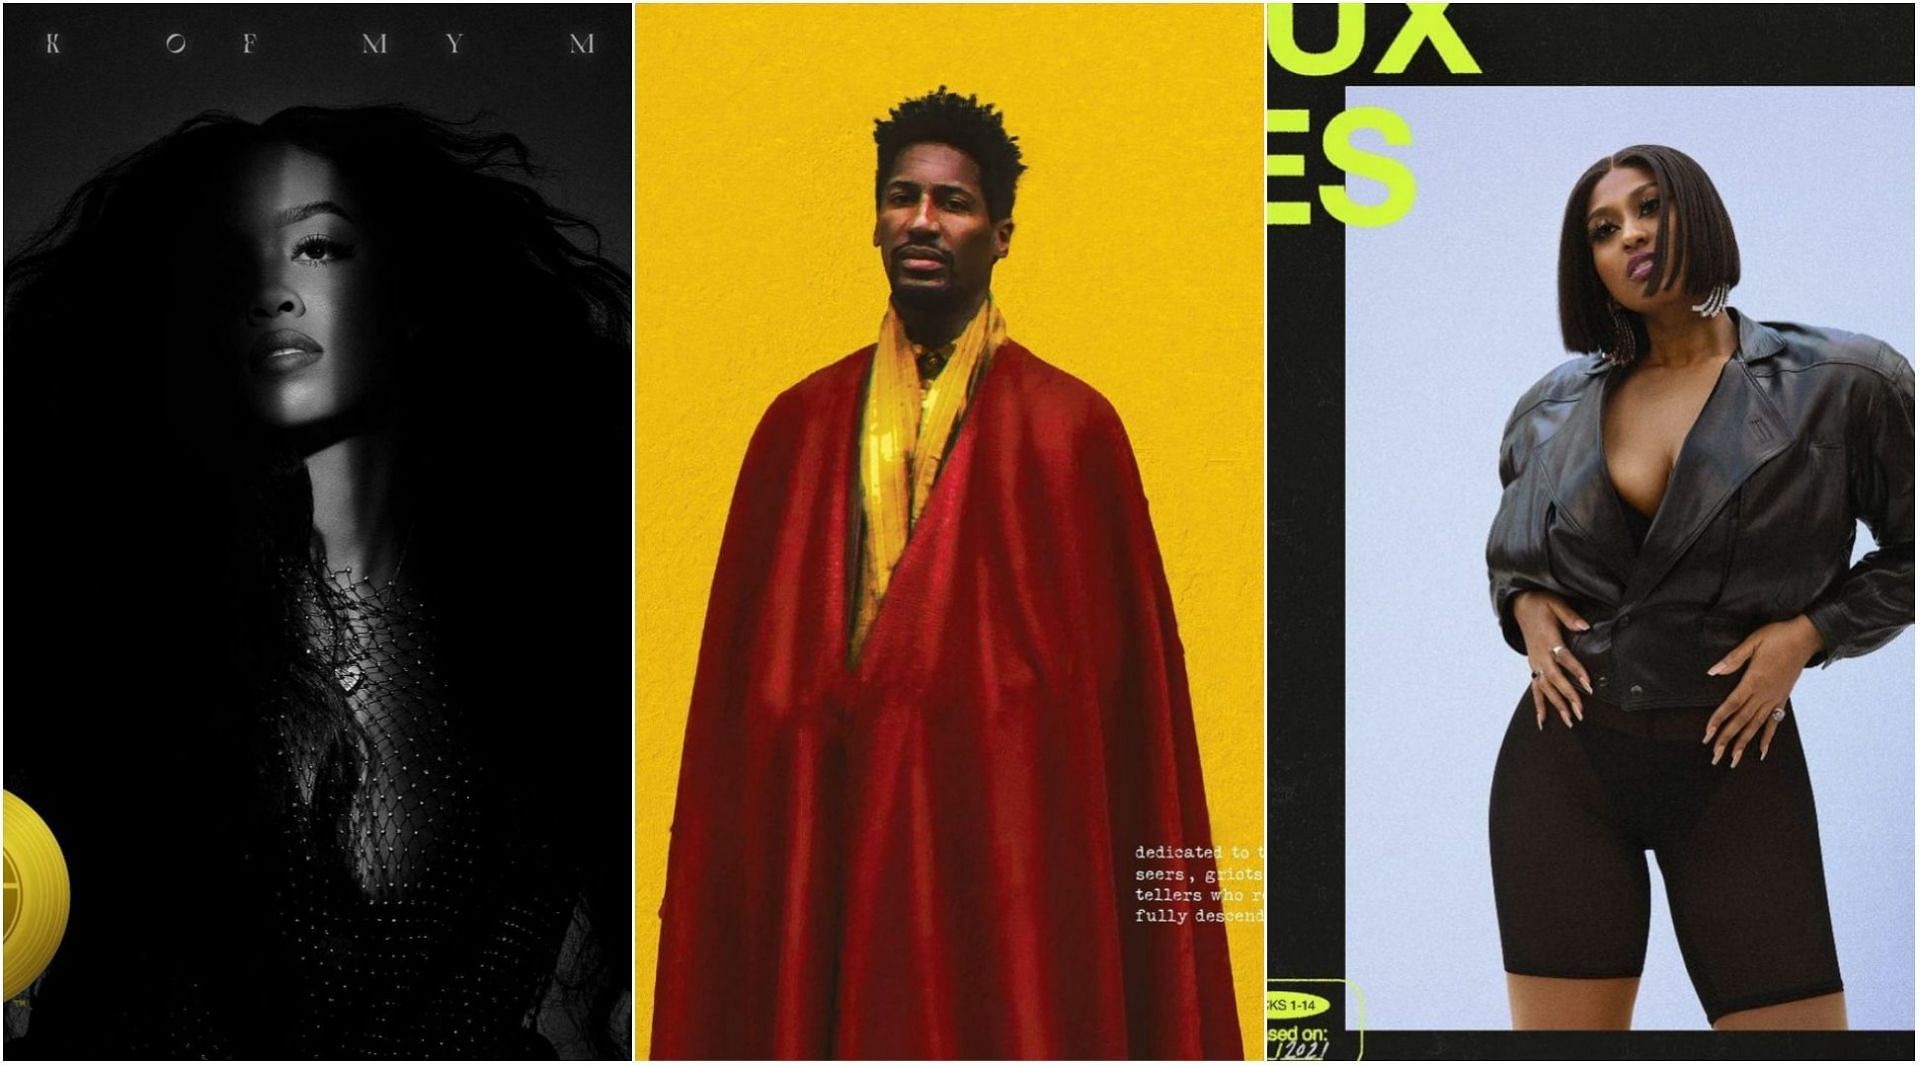 With the 2022 Grammys around the corner, the R&amp;B Album category is a hotly-contested one. (Images via Instagram: @hermusic, @jonbatiste, @jazminesullivan)